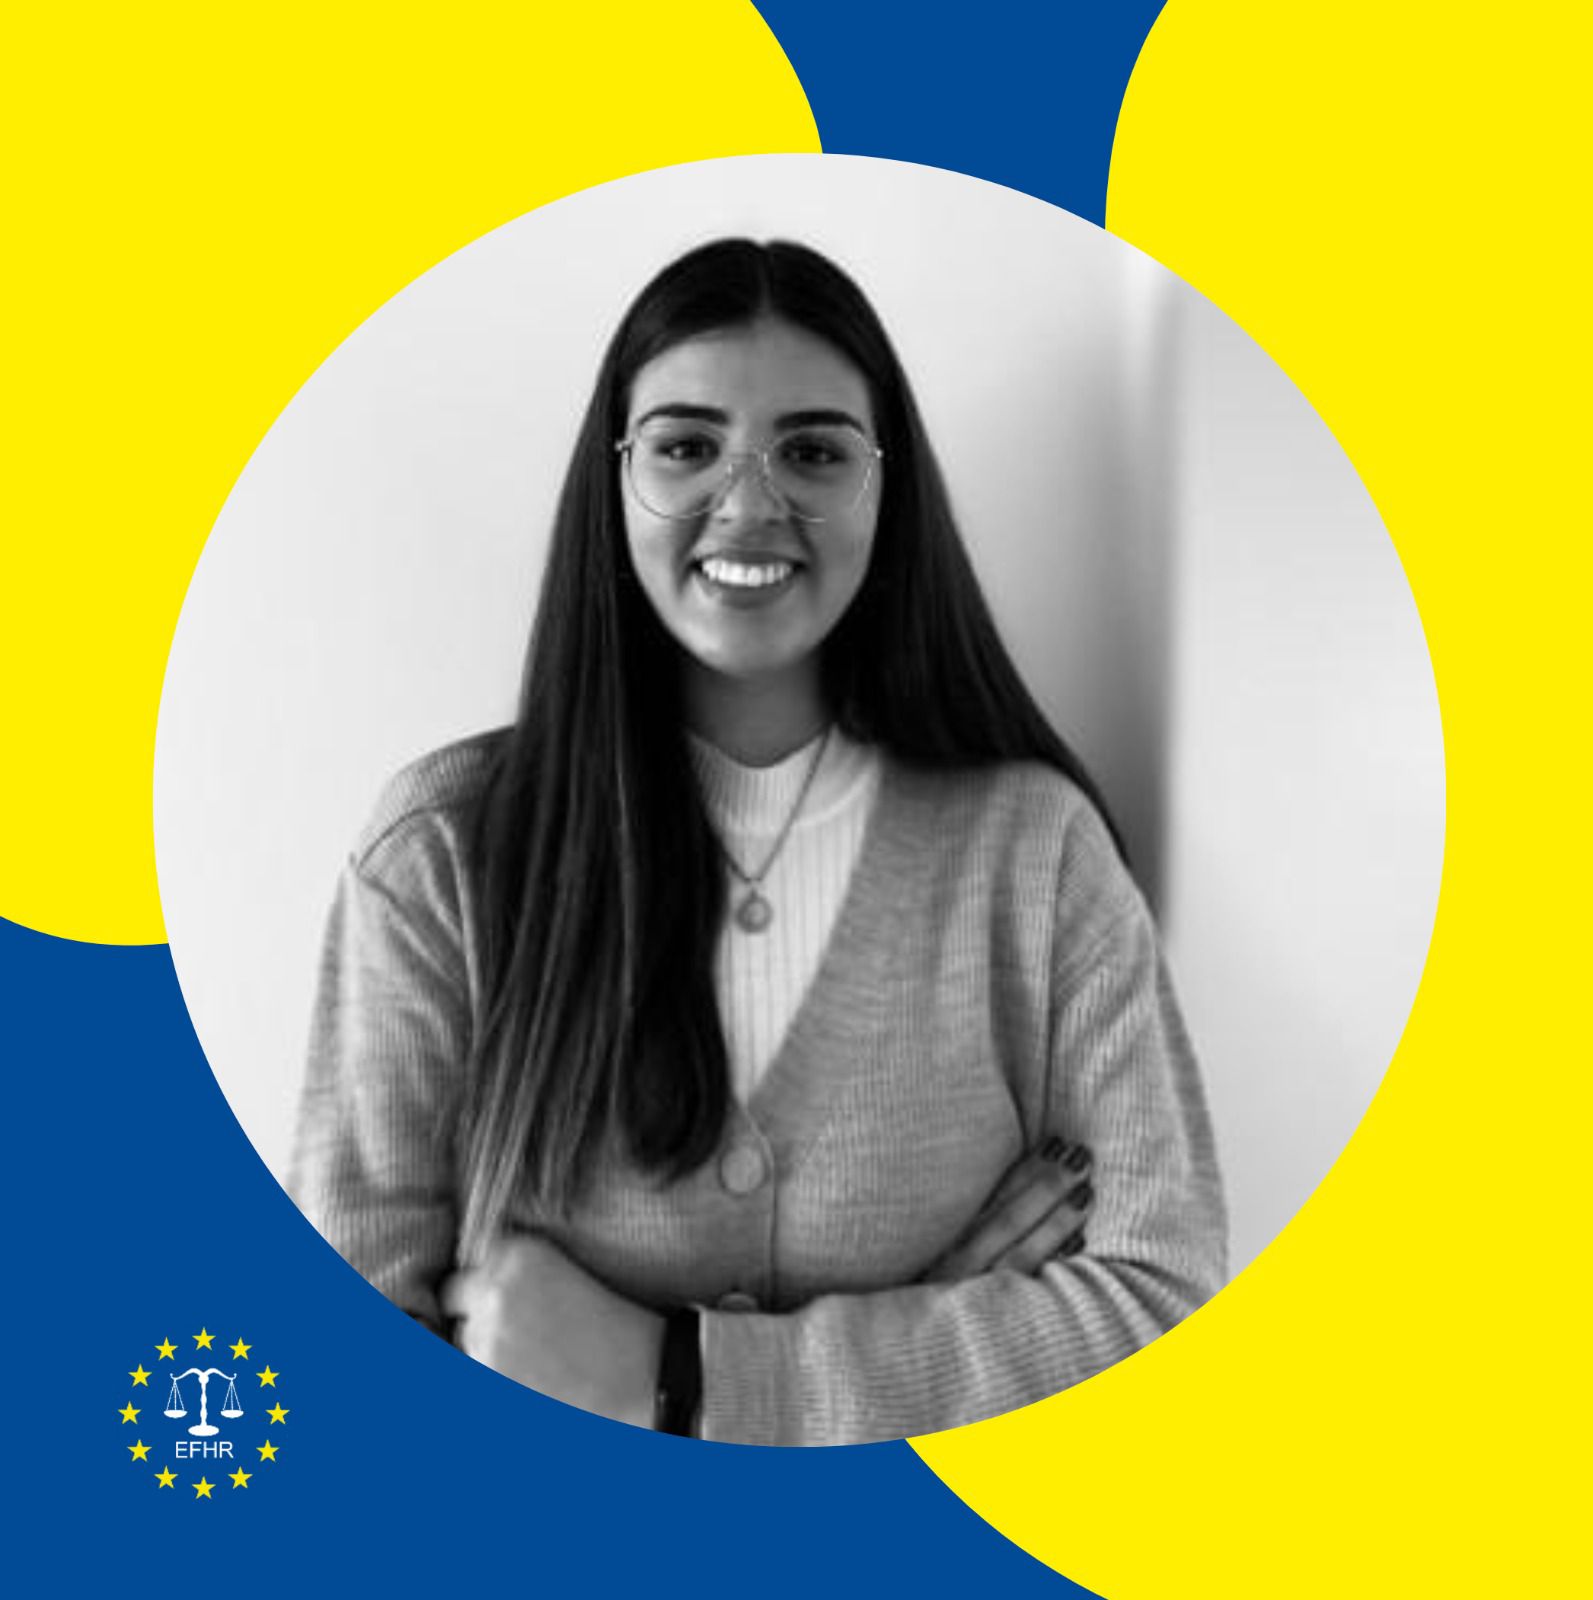 Meet our new trainee, Inês Paiva!